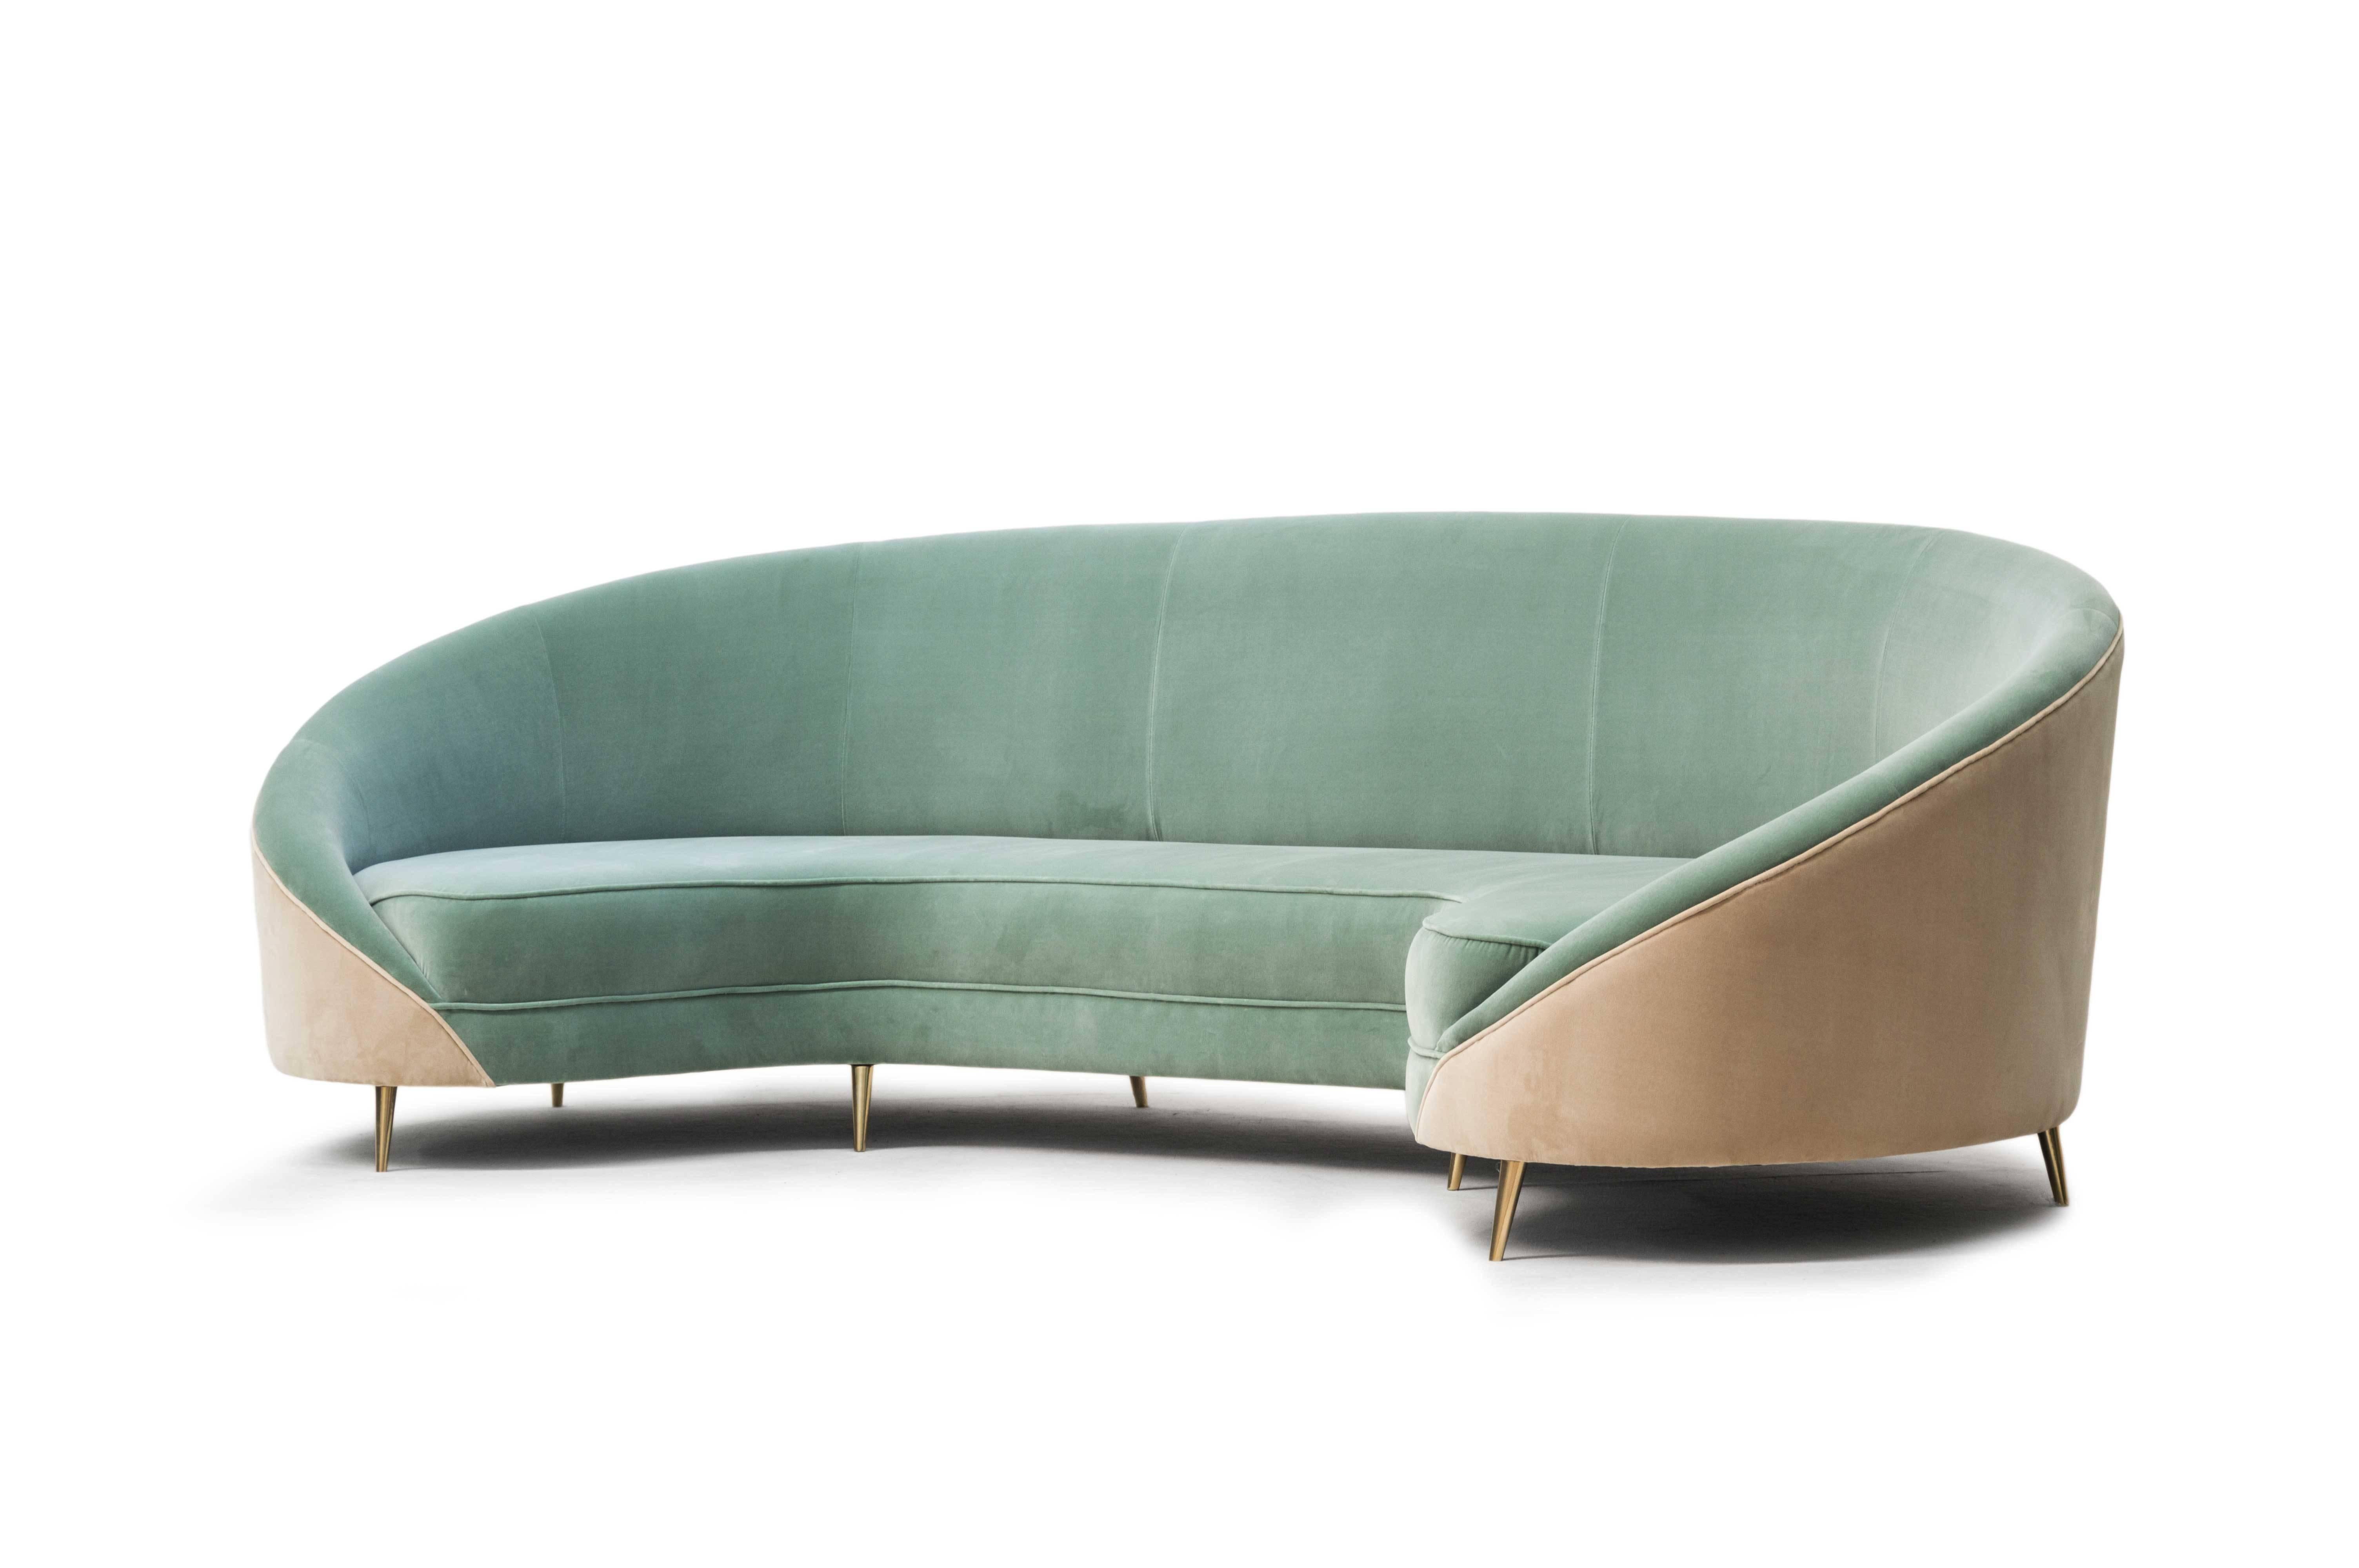 Warm light, bikinis and rock & roll. We are in mid-1950s in California and life couldn’t be better. Beverly sofa is the epitome of Hollywood glamour and luxury living. This magnificent piece evokes the culture and spirit of the era.
Finished in